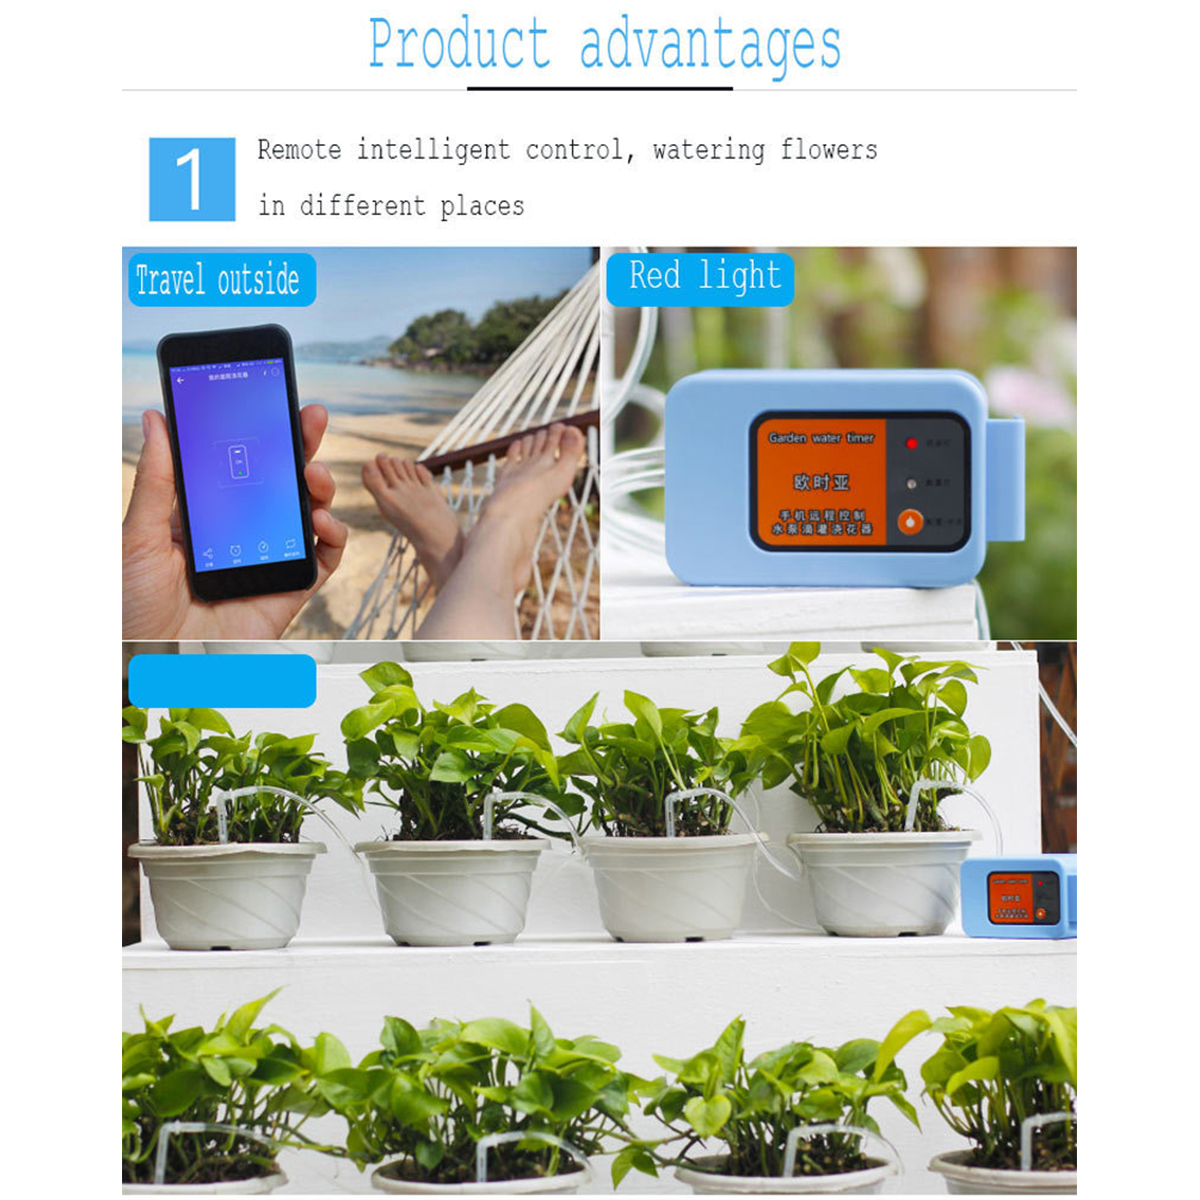 Automatic-Watering-Device-Phone-Control-Irrigation-System-Irrigation-Computer-Irrigation-Timer-with--1580072-6